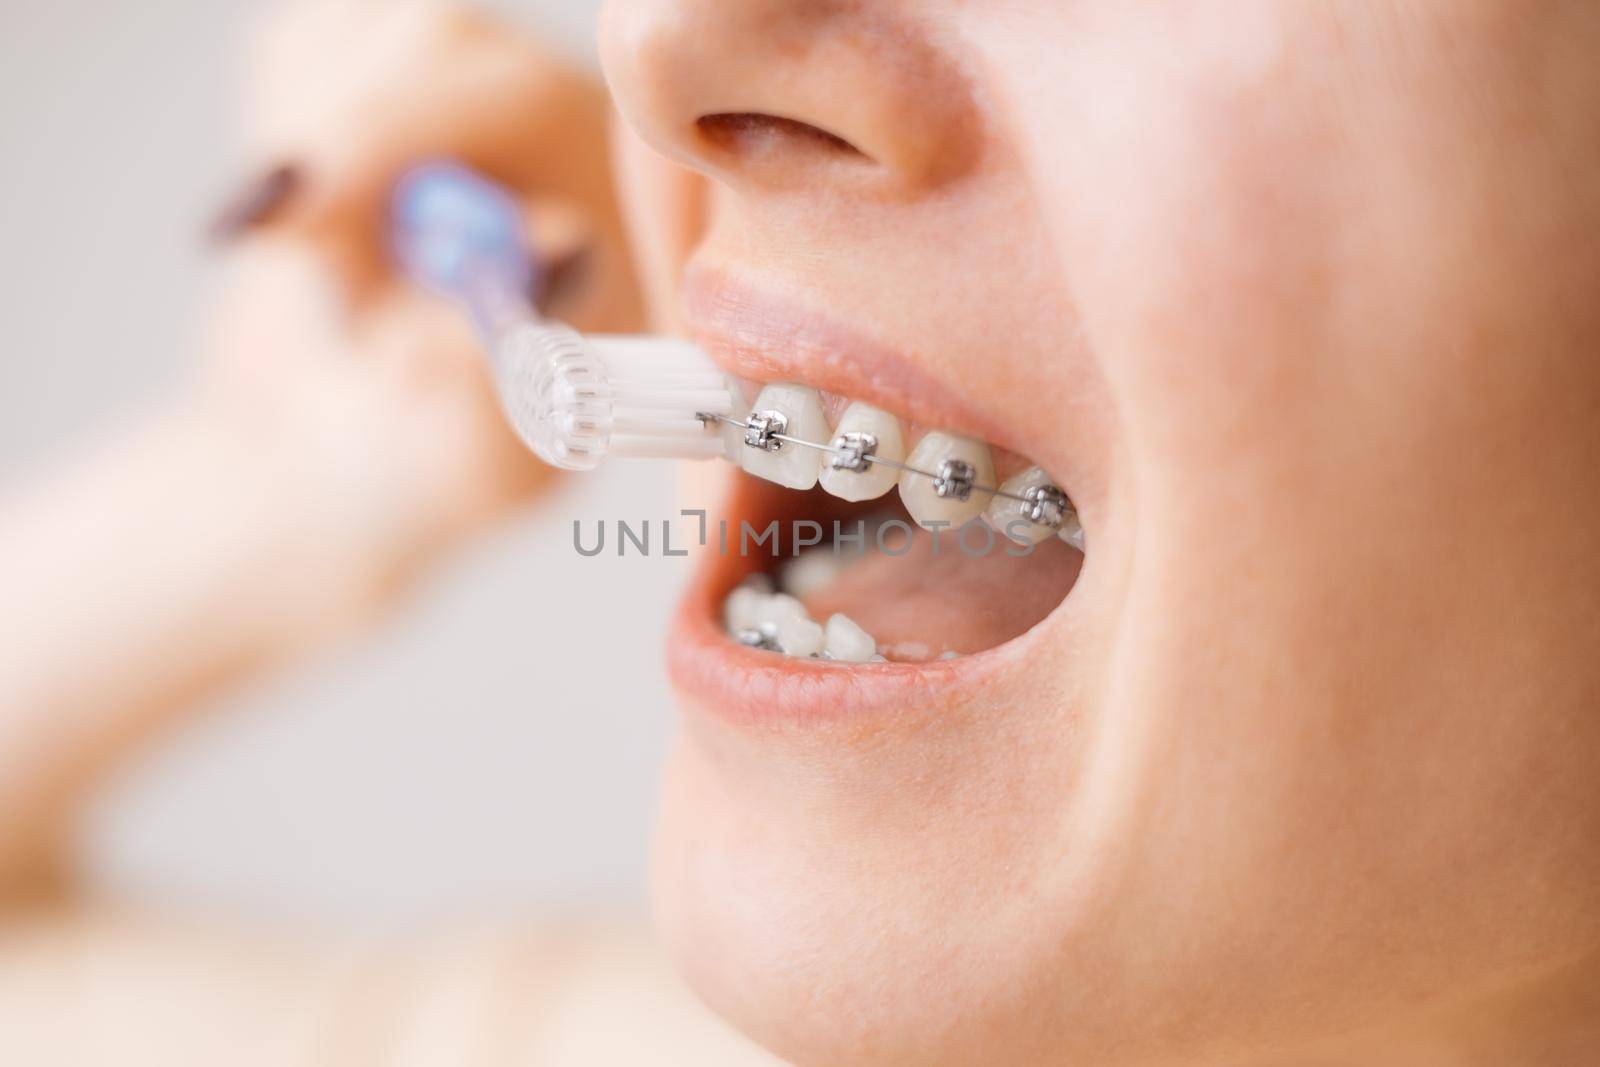 Young woman with braces on her teeth brushing her teeth with a toothbrush, close-up. by alexAleksei